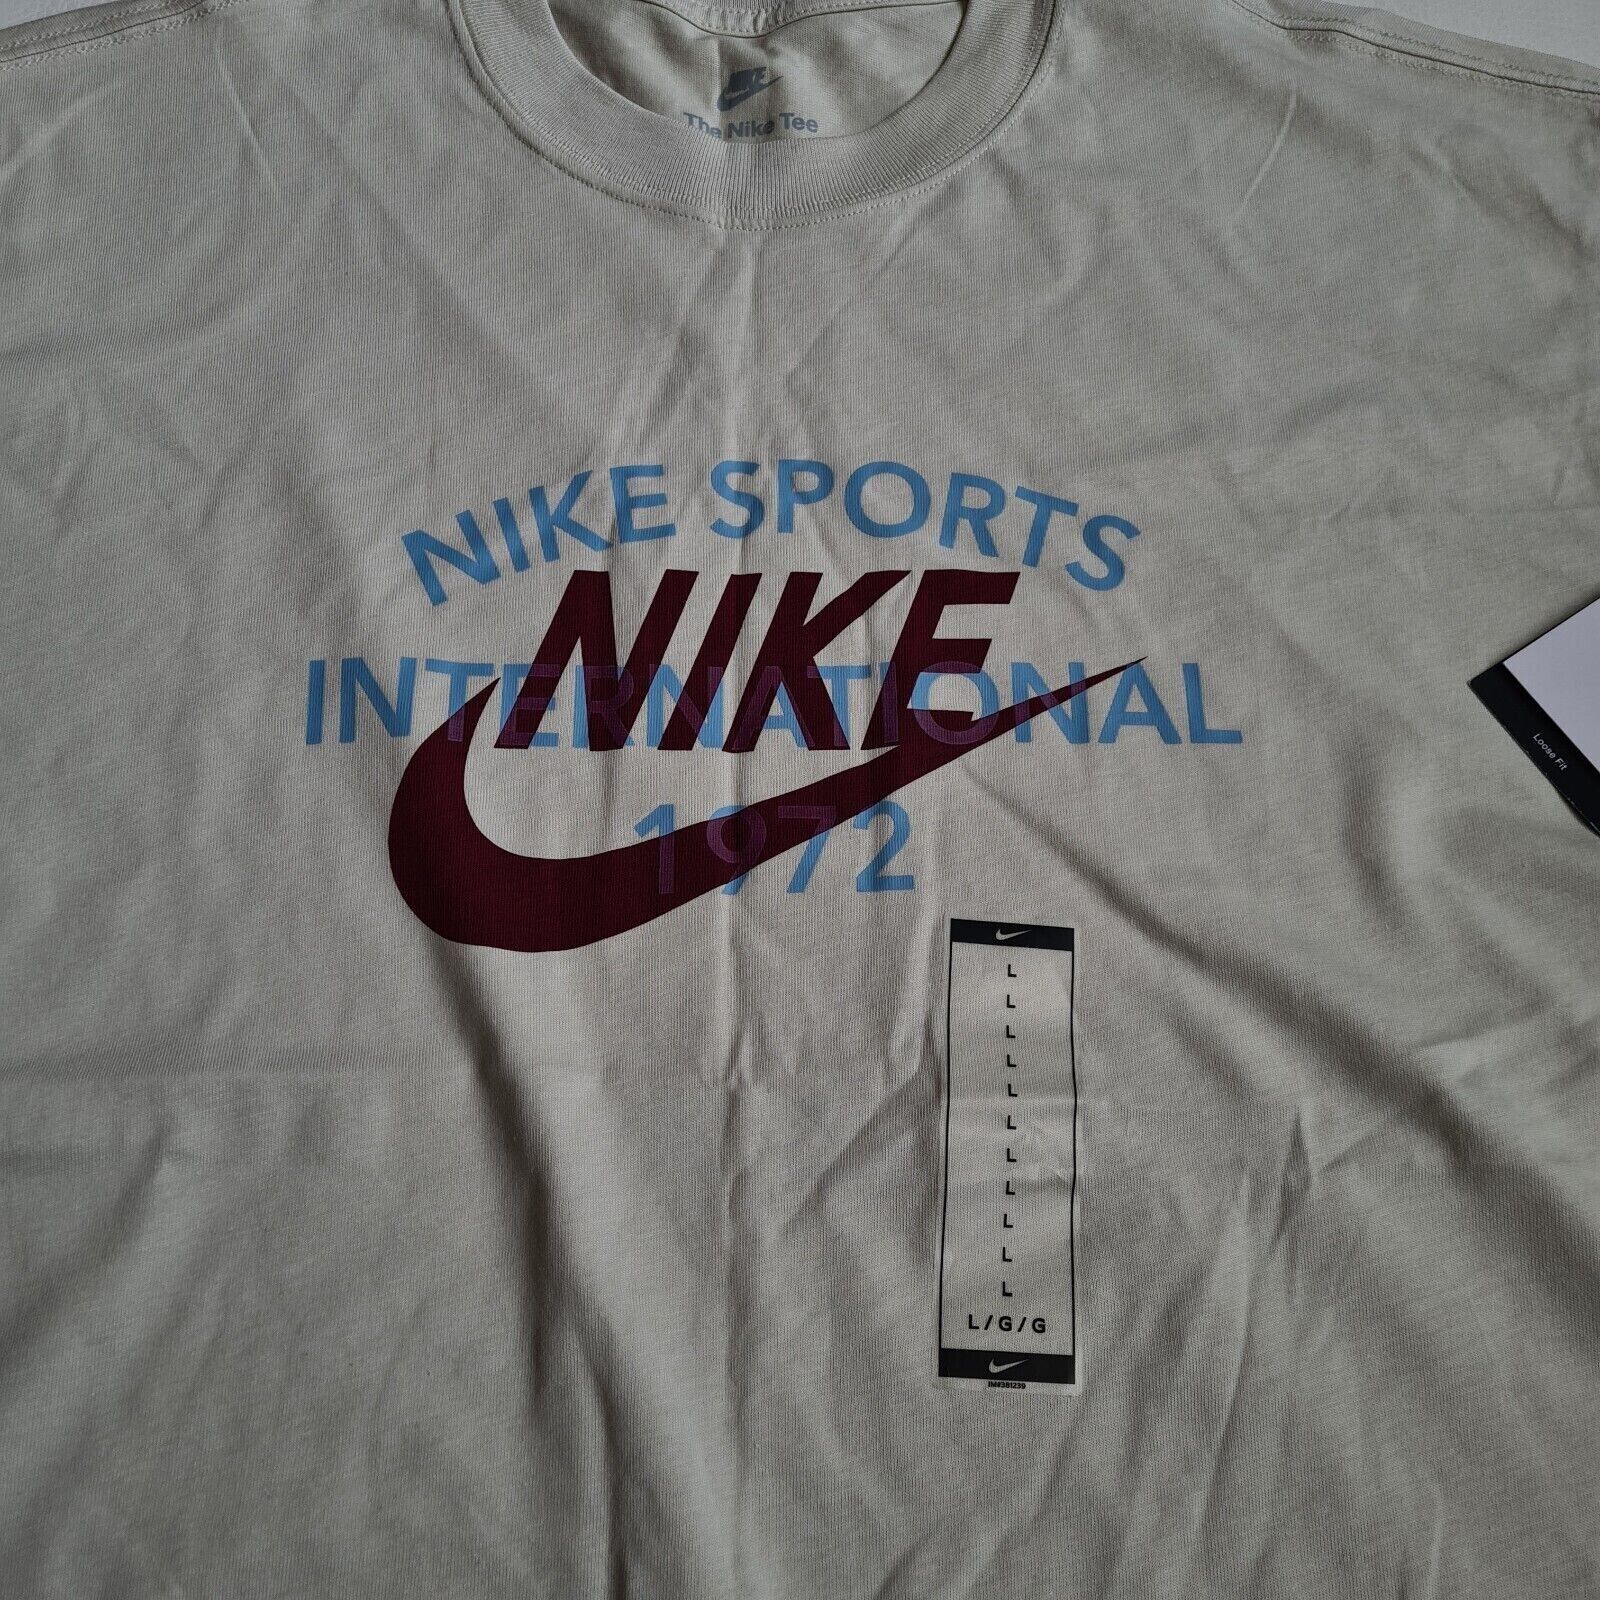 Nike Men's Loose Fit Swoosh T-Shirt Sports DR8006 072 Athletic Beige Size 2XL - Picture 4 of 4